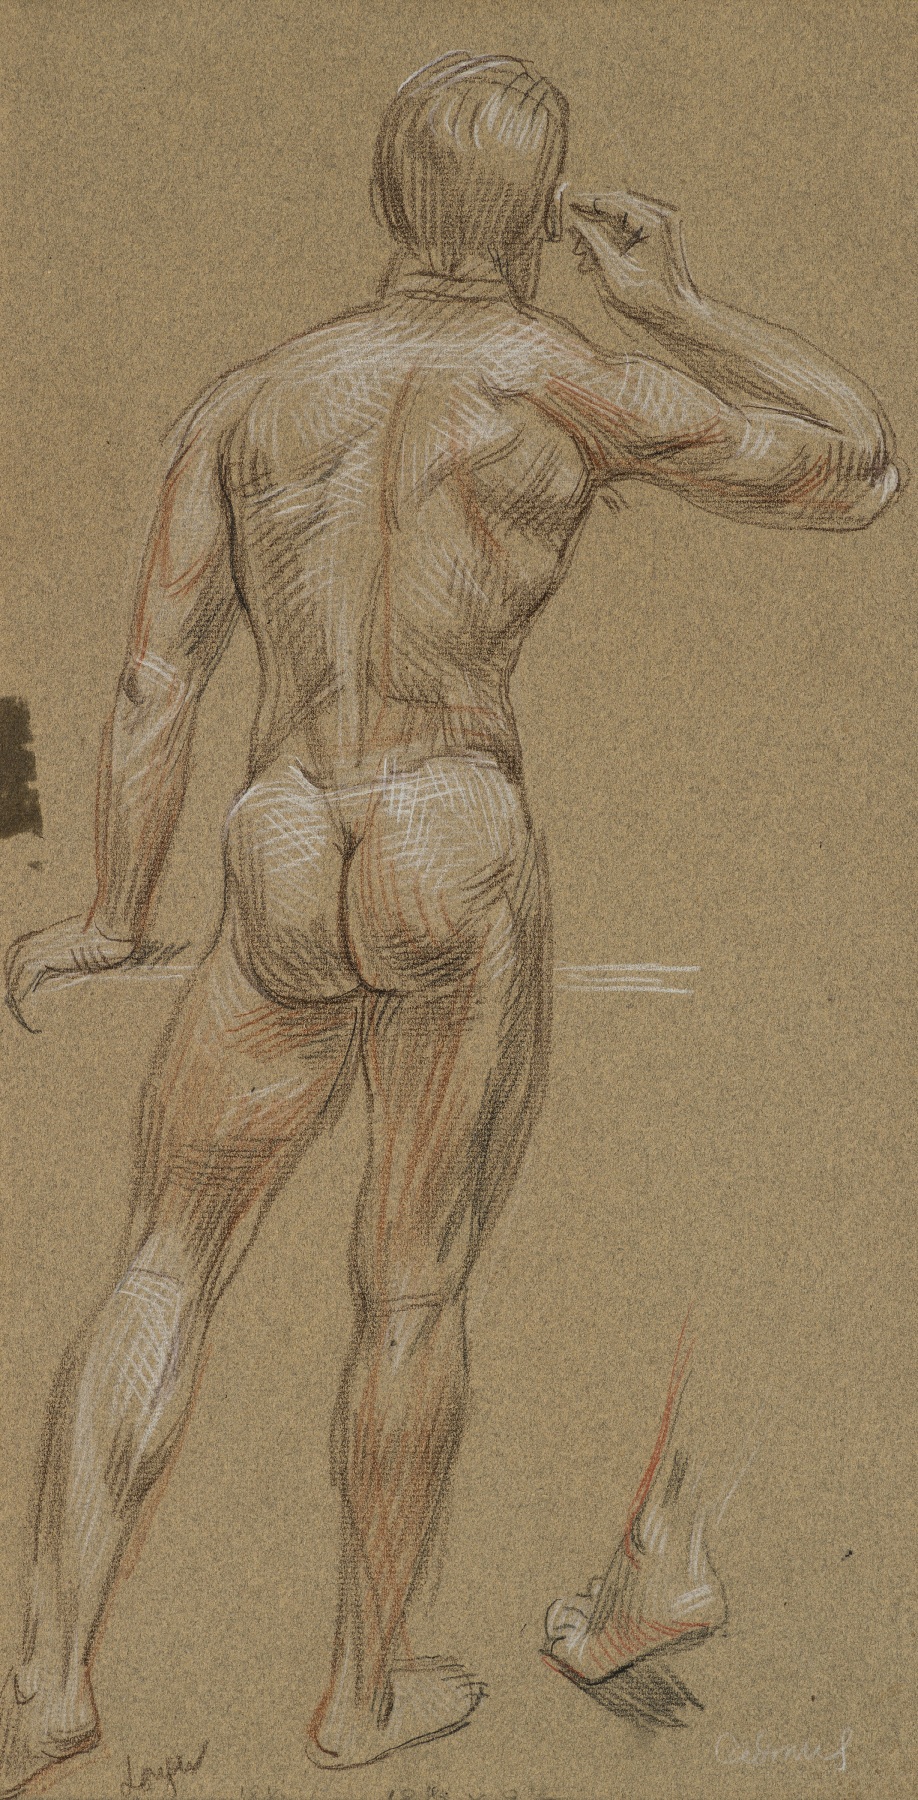 Study for the Bath, c. 1951. Crayon on paper 18 1/2 x 9 1/2 inches